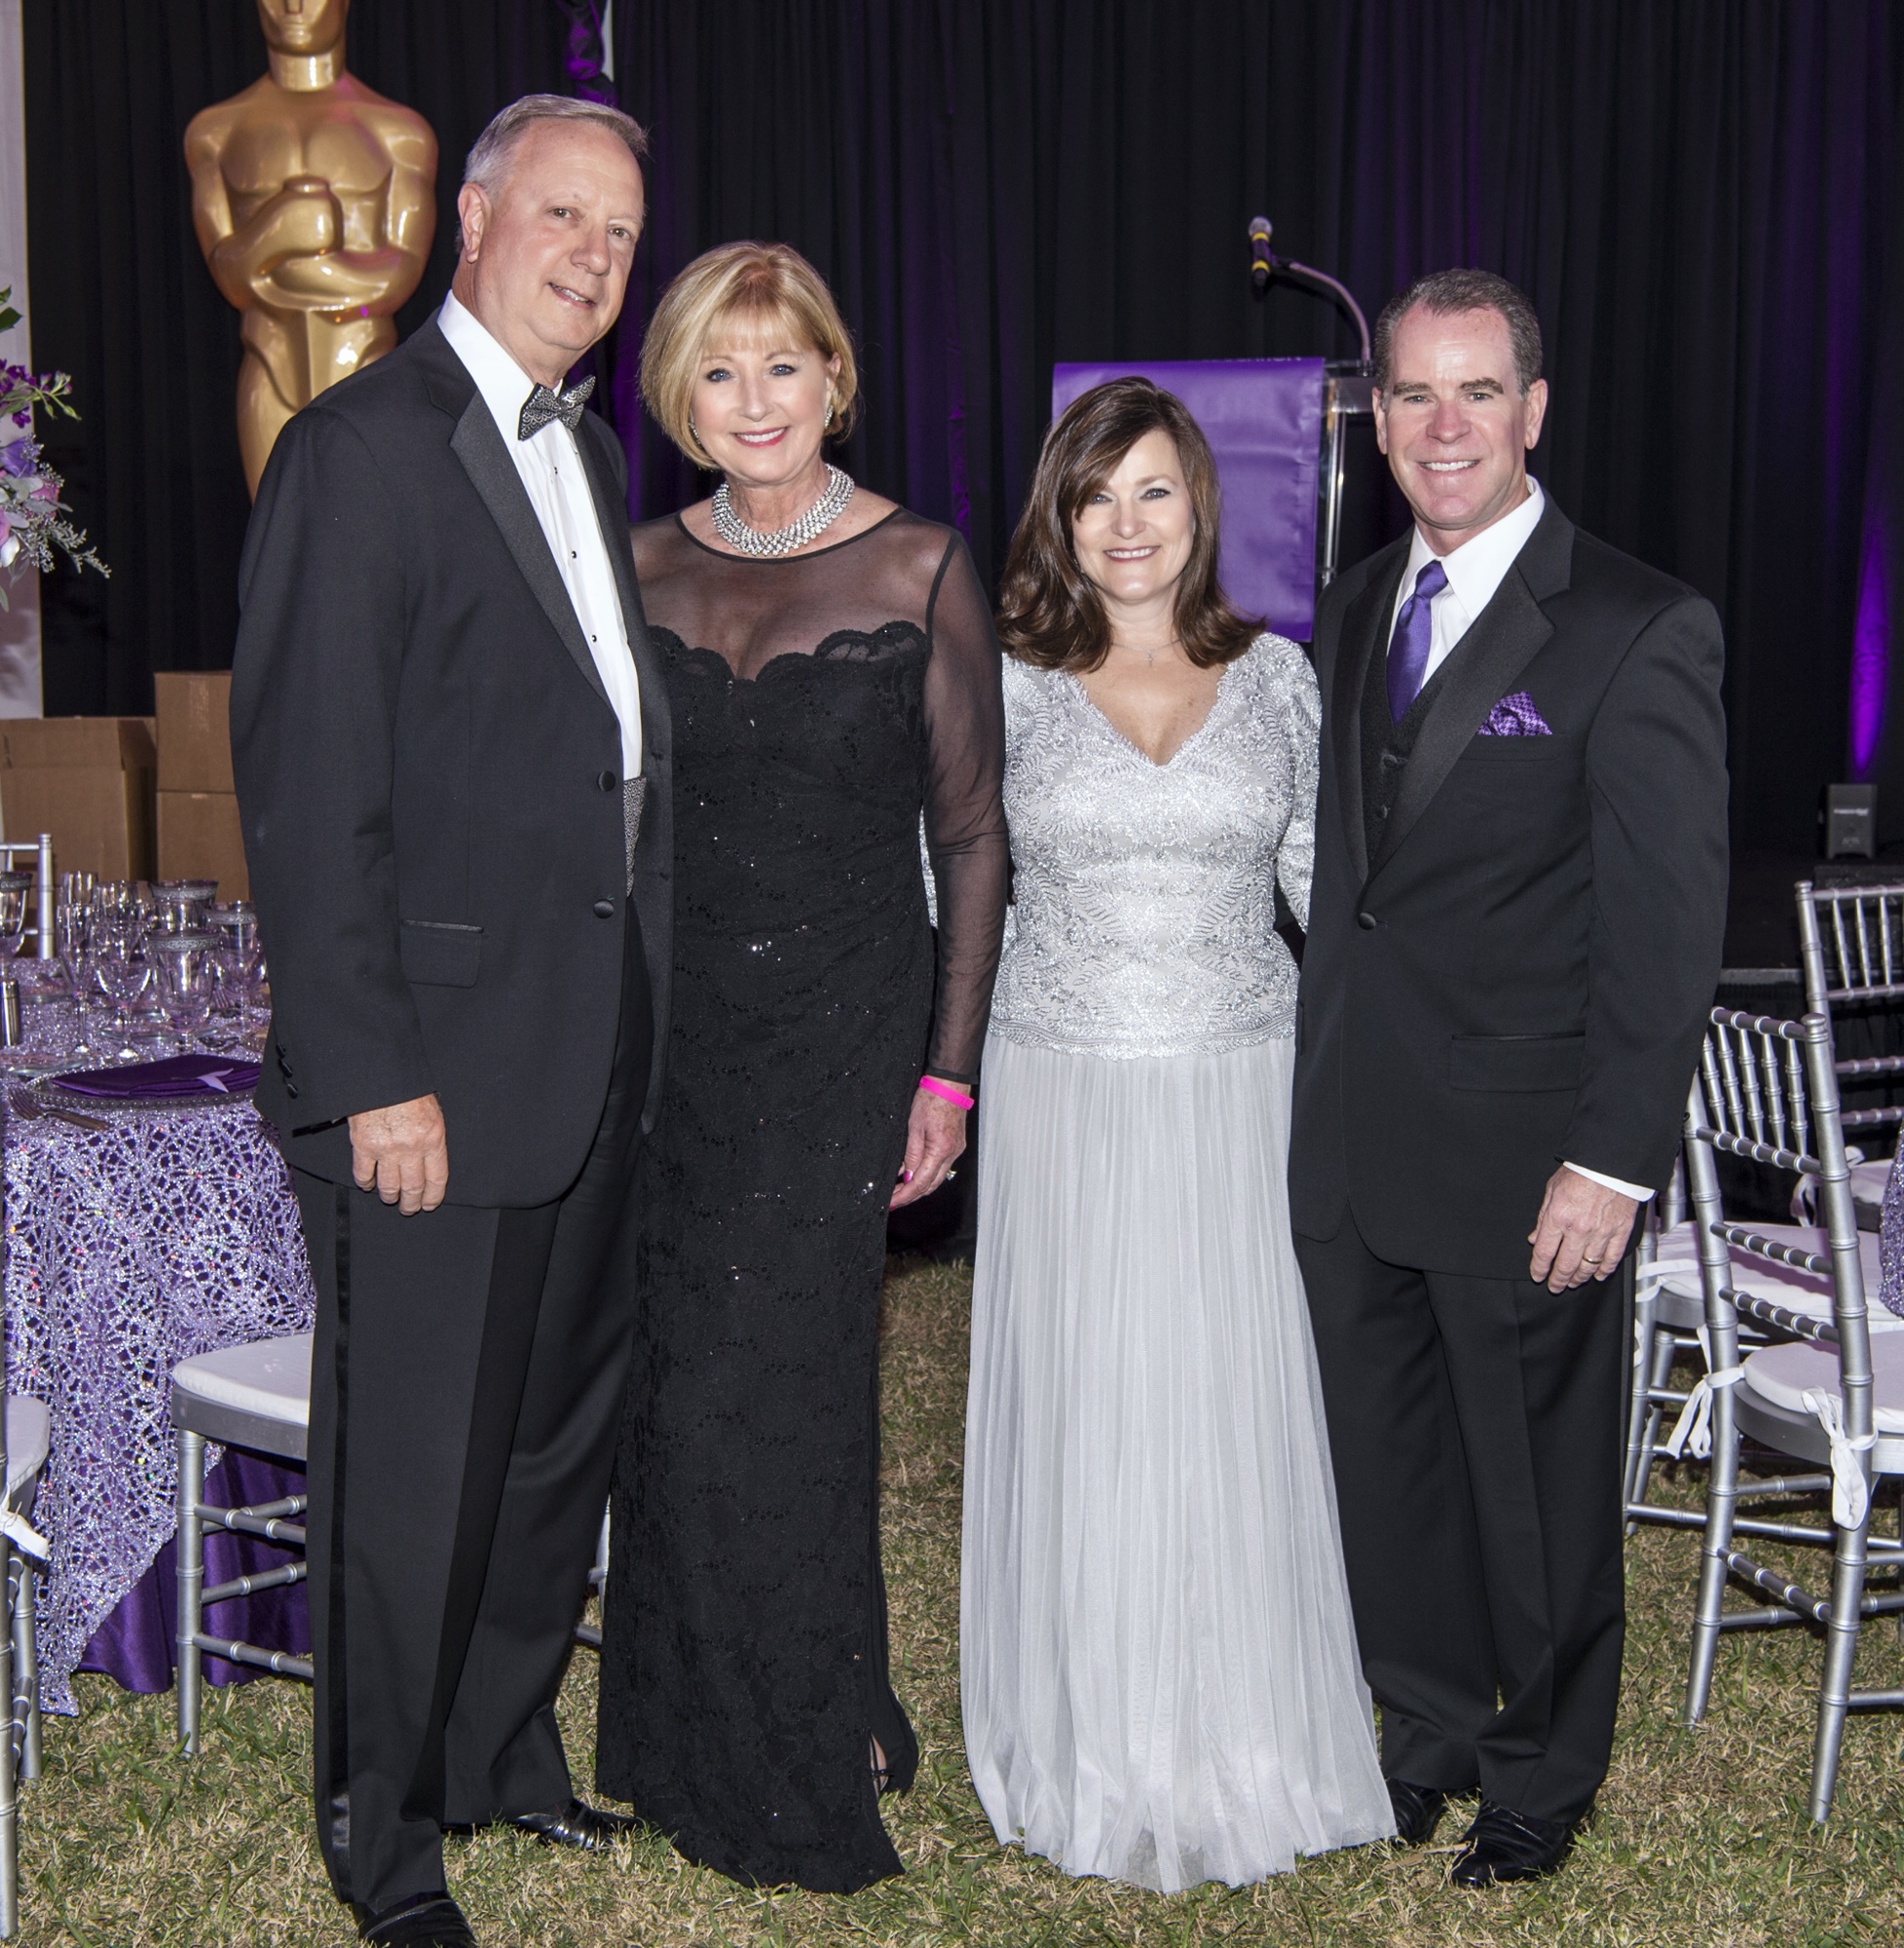 Co-Chairs David and Brenda Maraman and Wendy and Shaun Merriman at the 15th Annual Van Wezel Foundation Gala featuring Josh Groban on Sunday, Feb. 28 at Van Wezel Performing Arts Hall. Photo by Cliff Roles